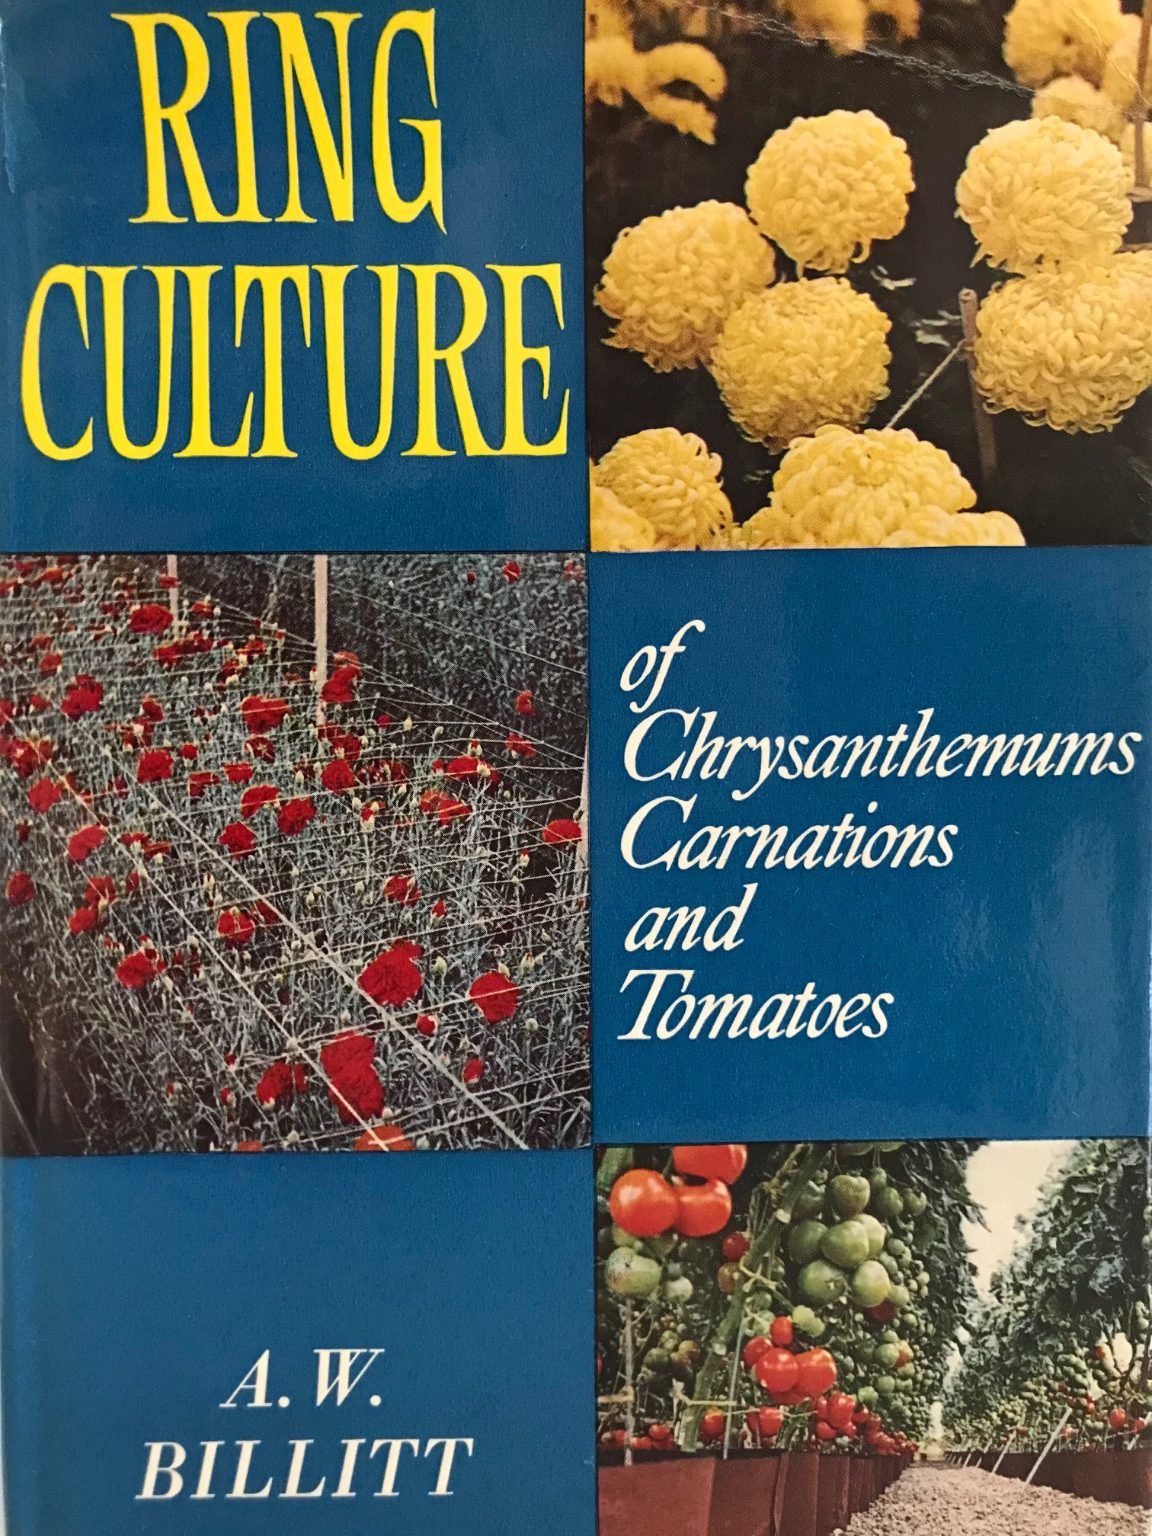 RING CULTURE: of Chrysanthemums Carnations and Tomatoes